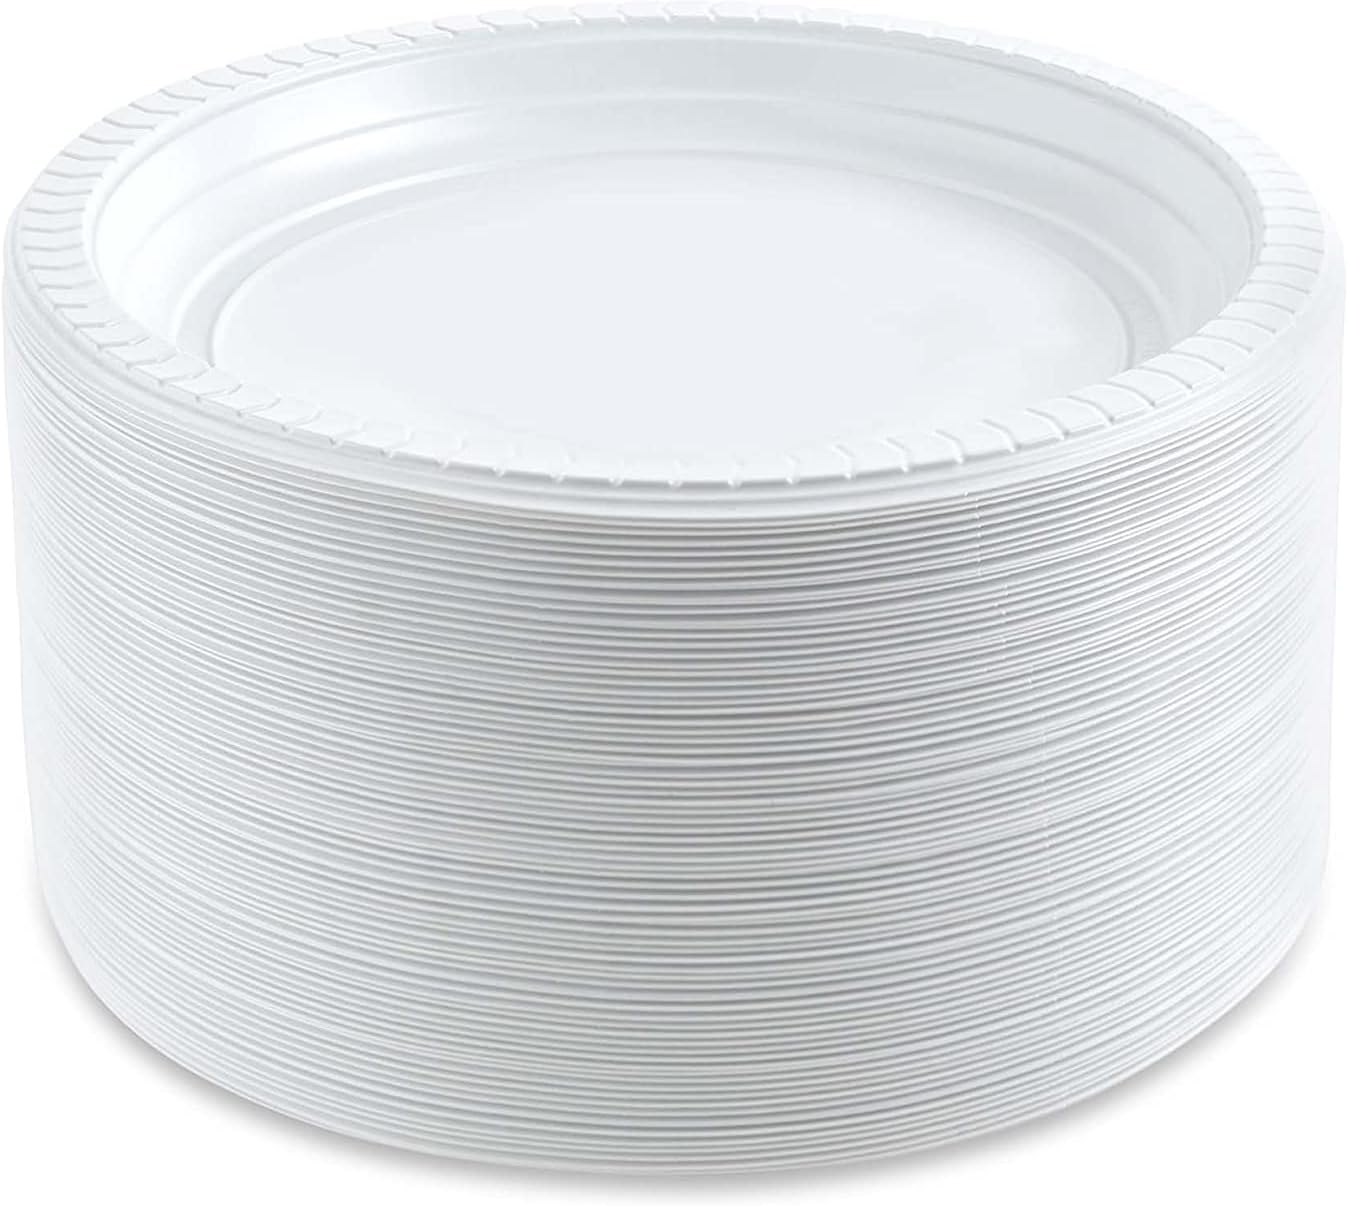 PLASTICPRO 6 inch Round Plastic Plates Microwaveable, Disposable, White, Dinnerware 200 Count